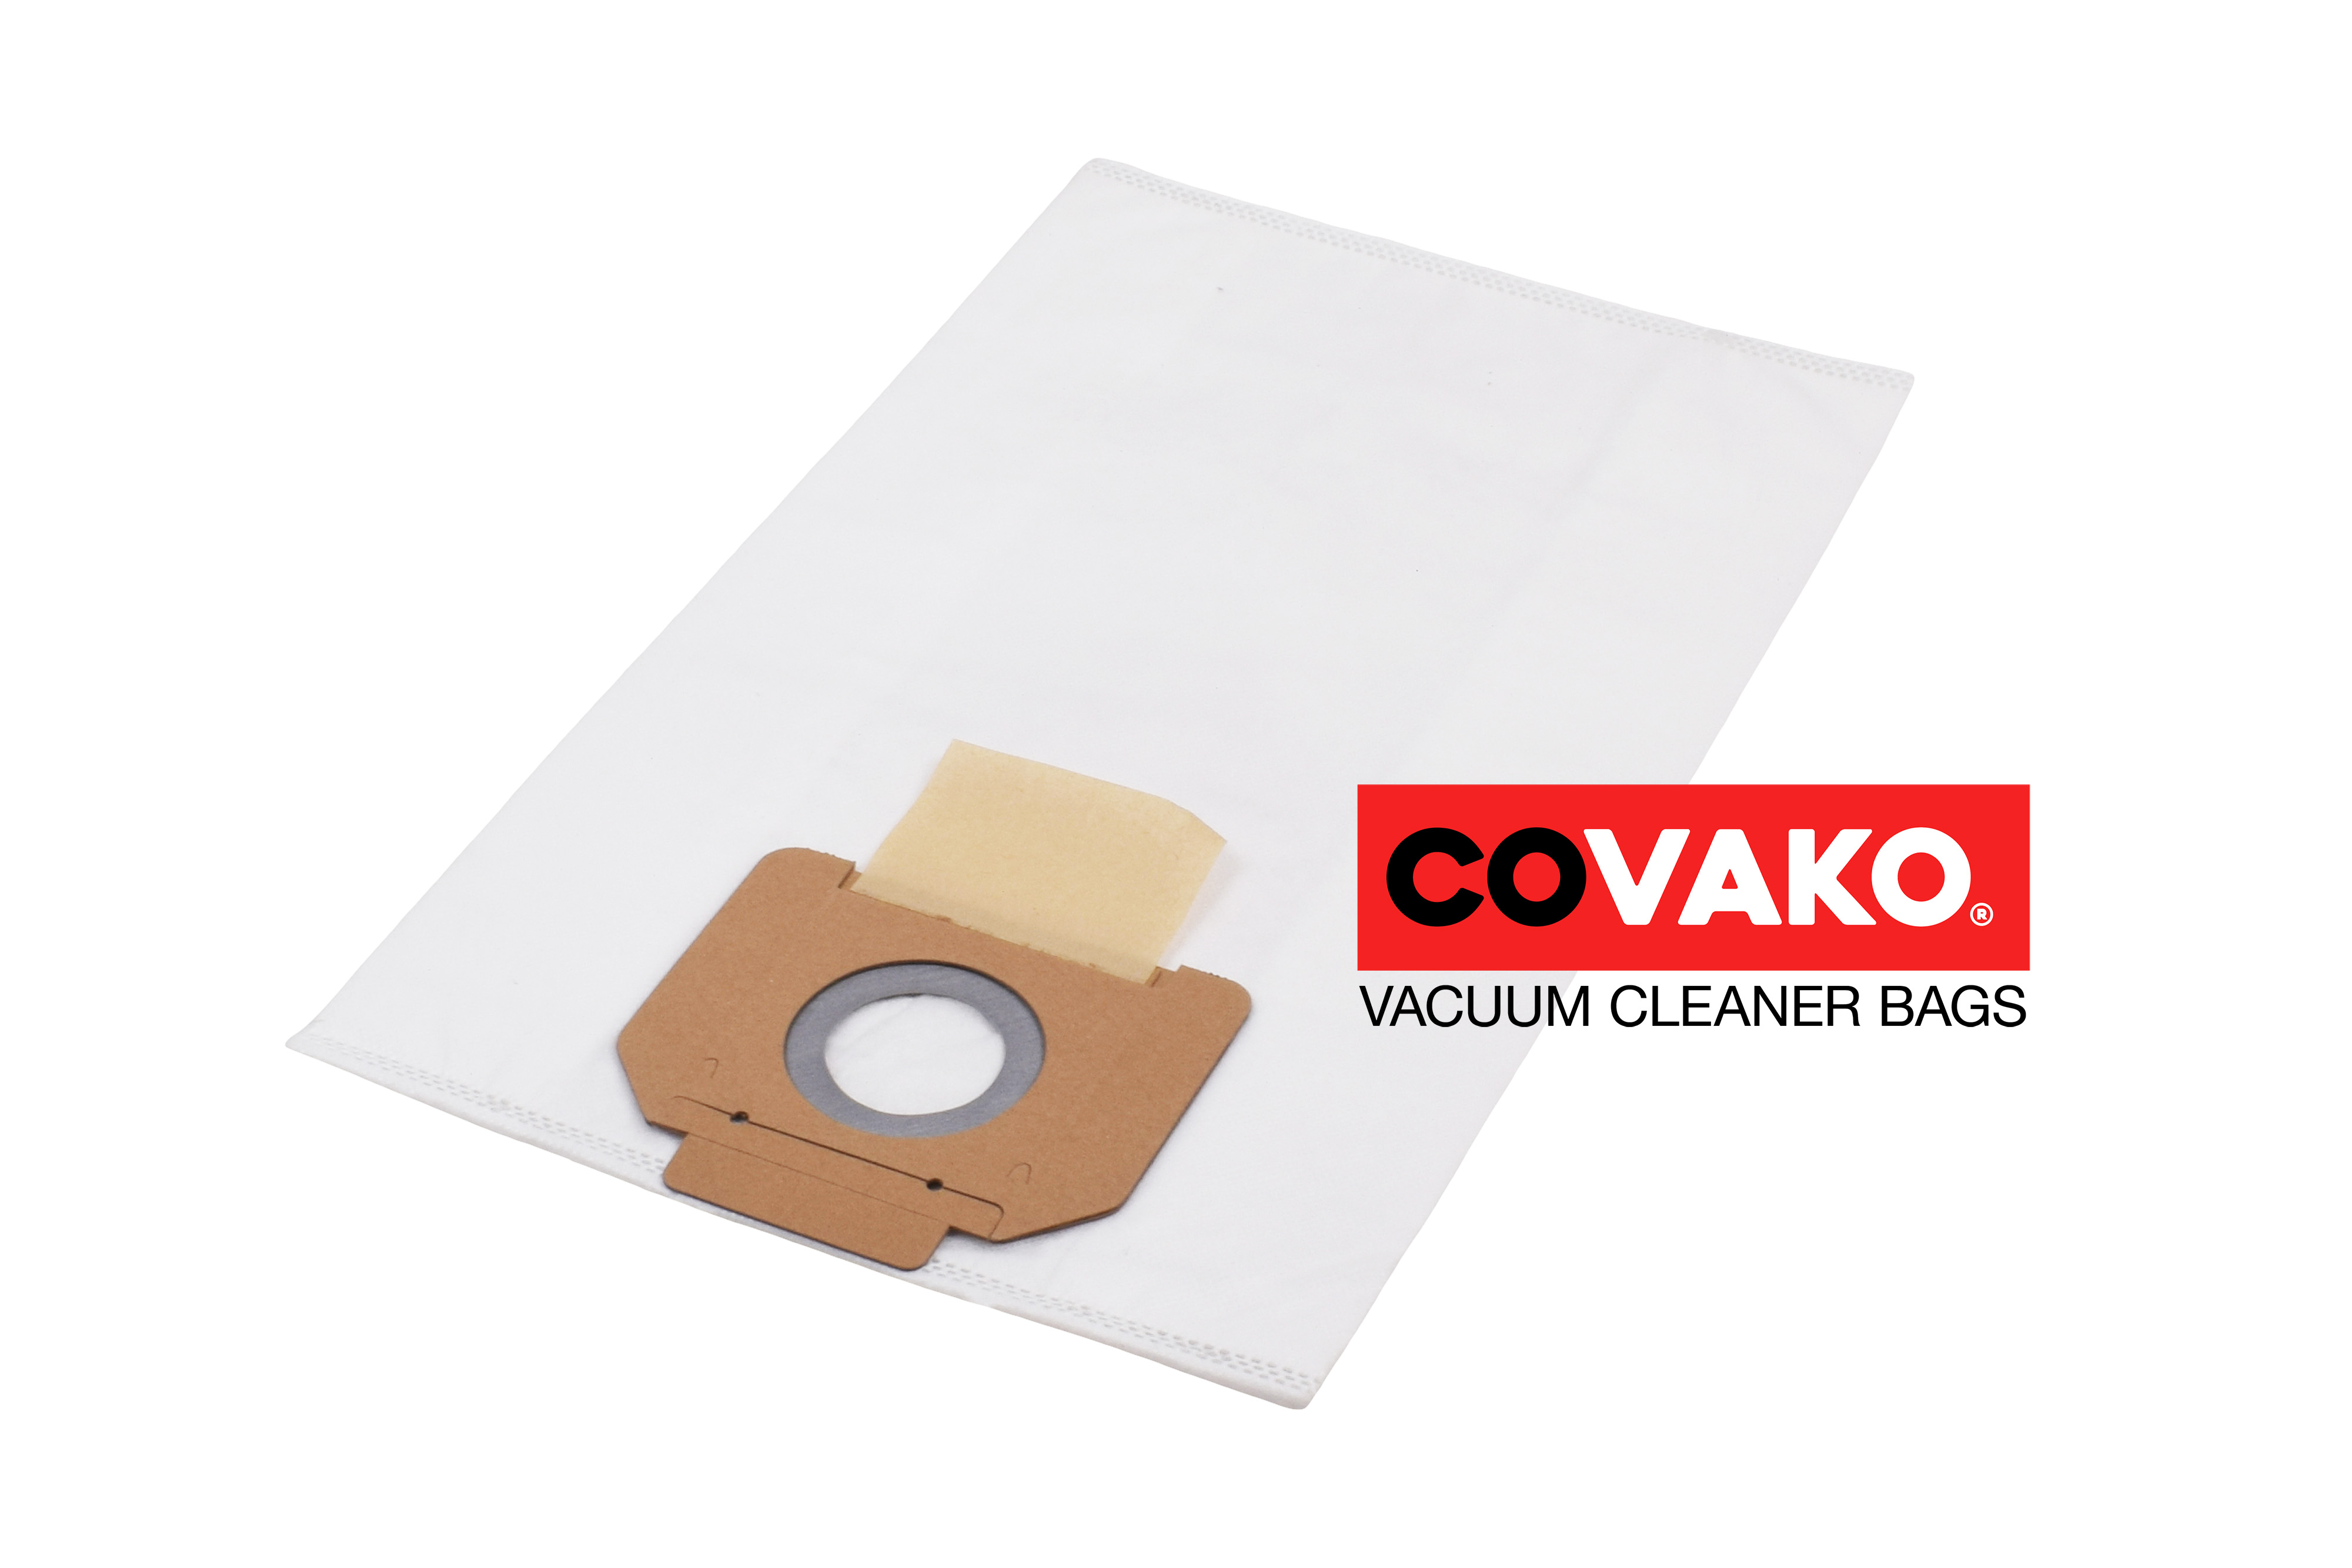 Gansow YS 1300/16 / Synthesis - Gansow vacuum cleaner bags